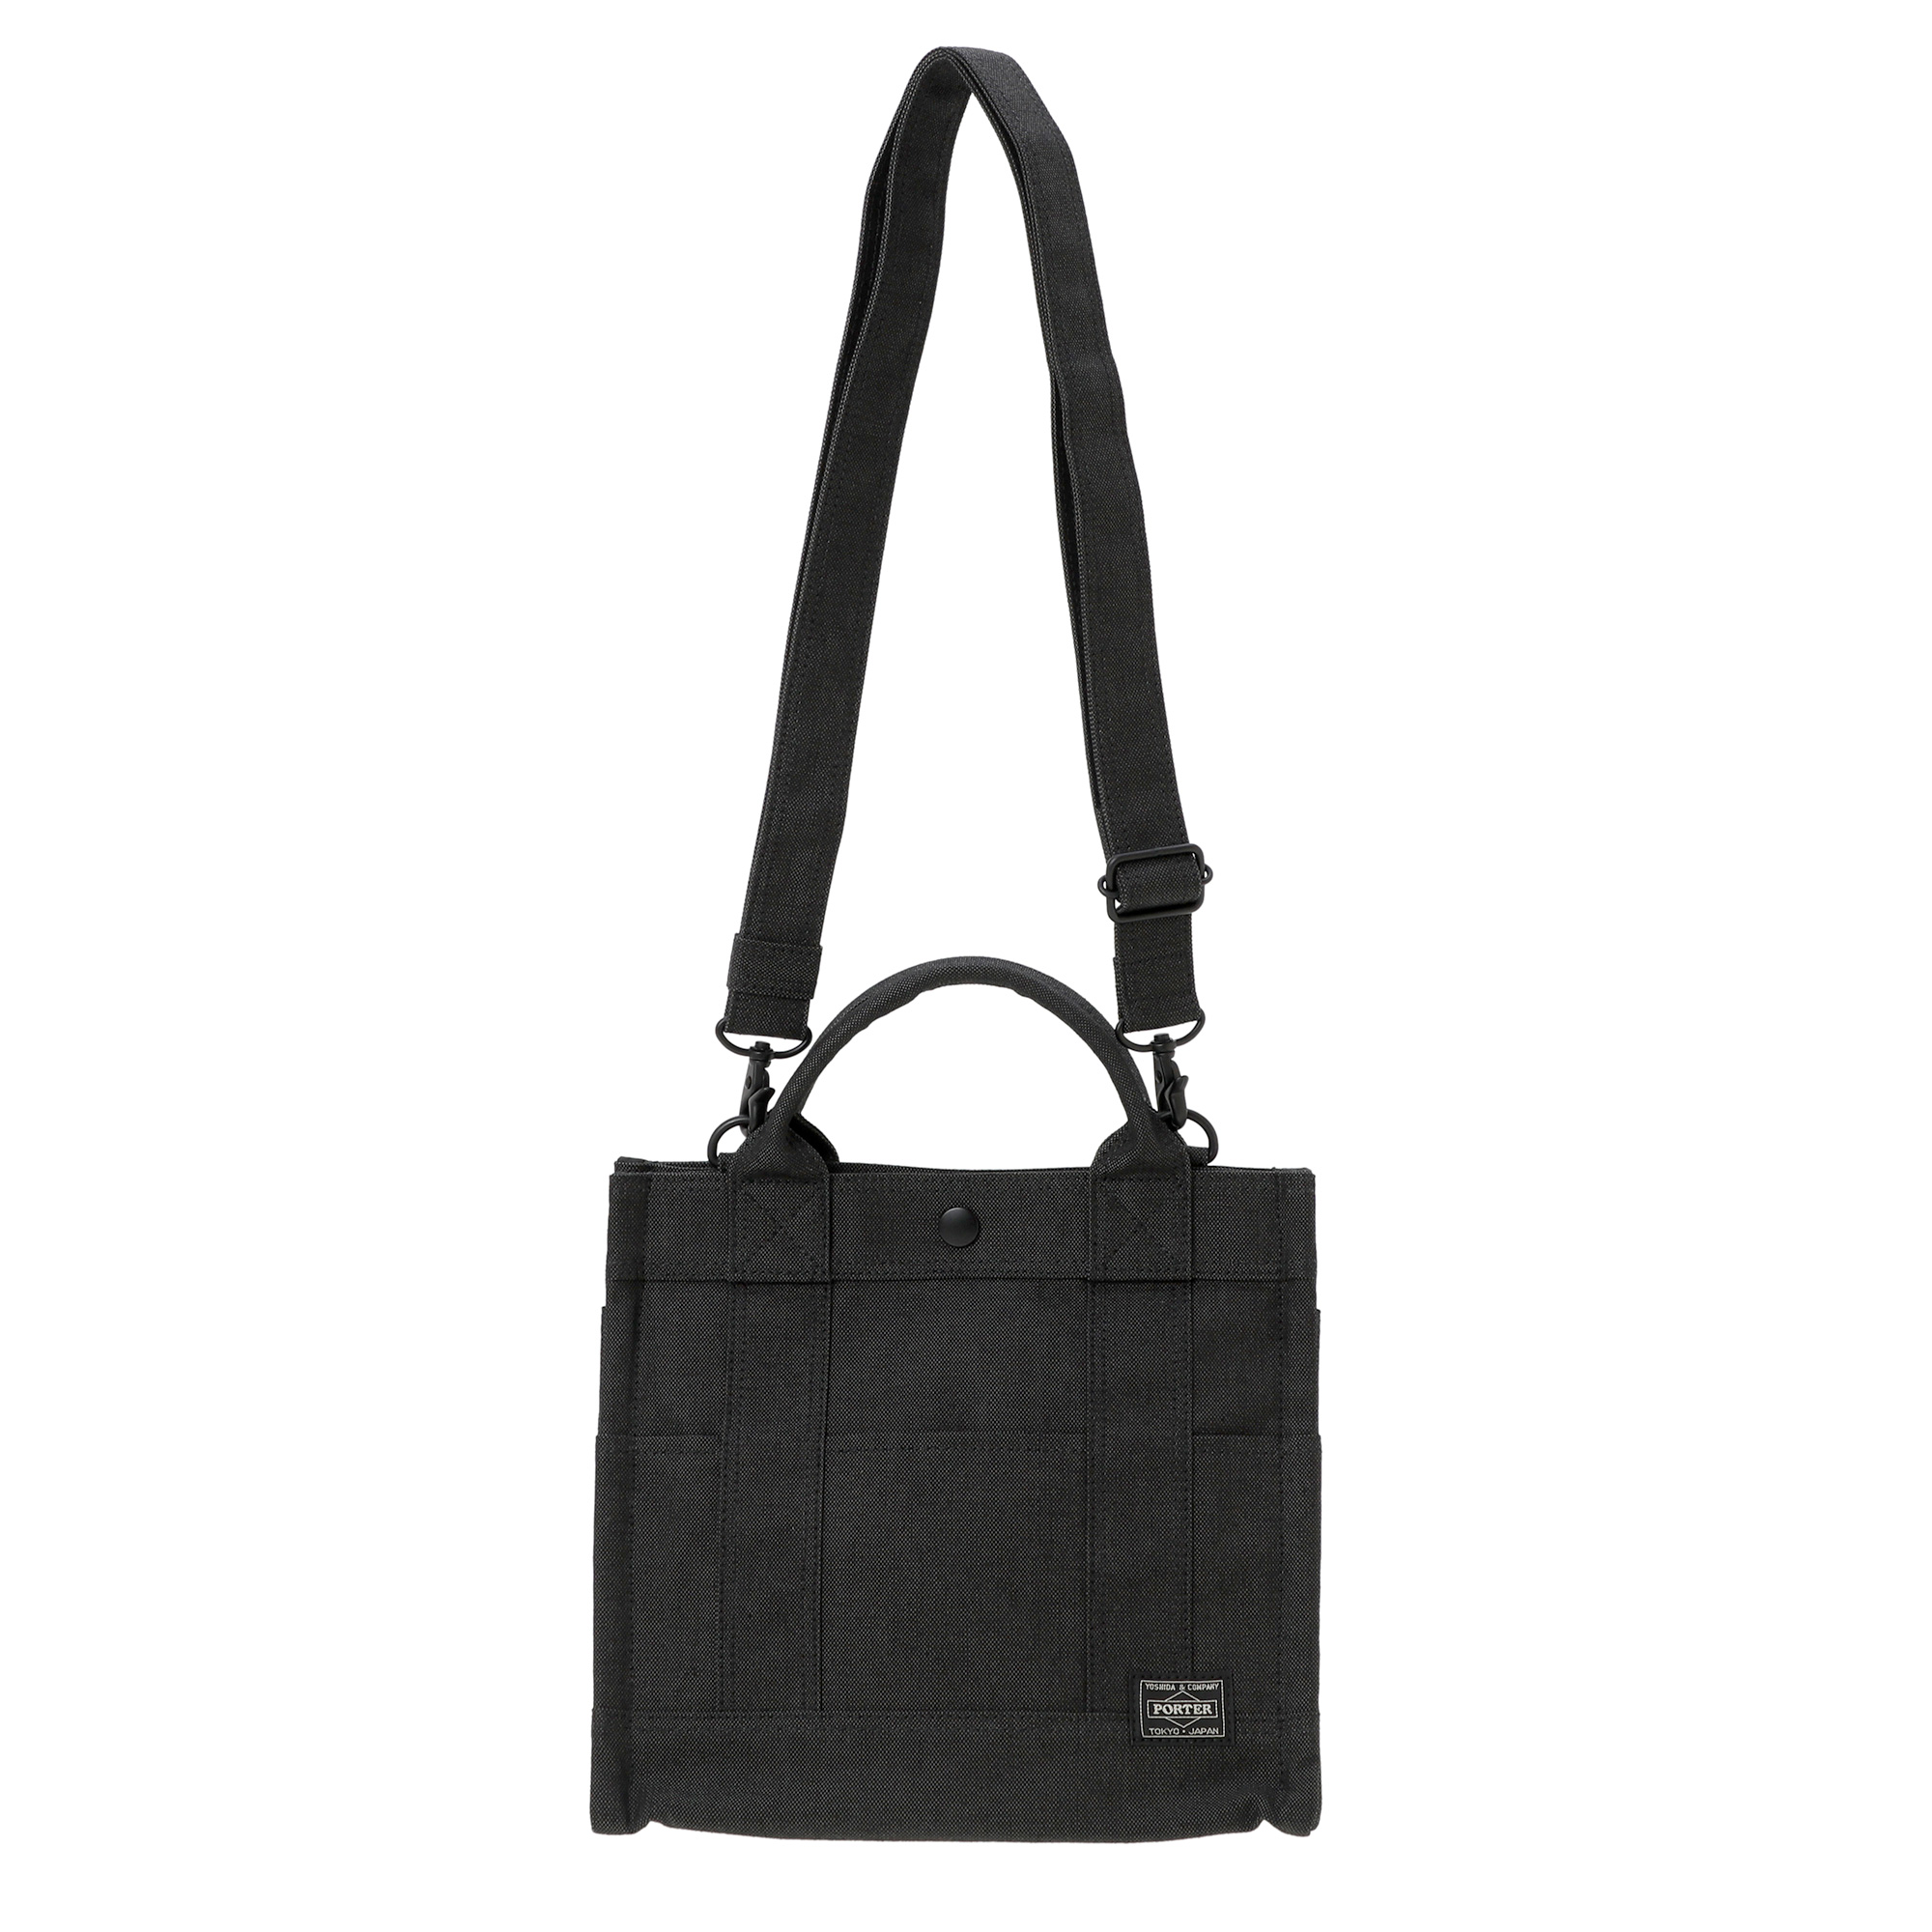 PORTER SMOKY TOTE BAG(S) ポーター トートバッグ - トートバッグ